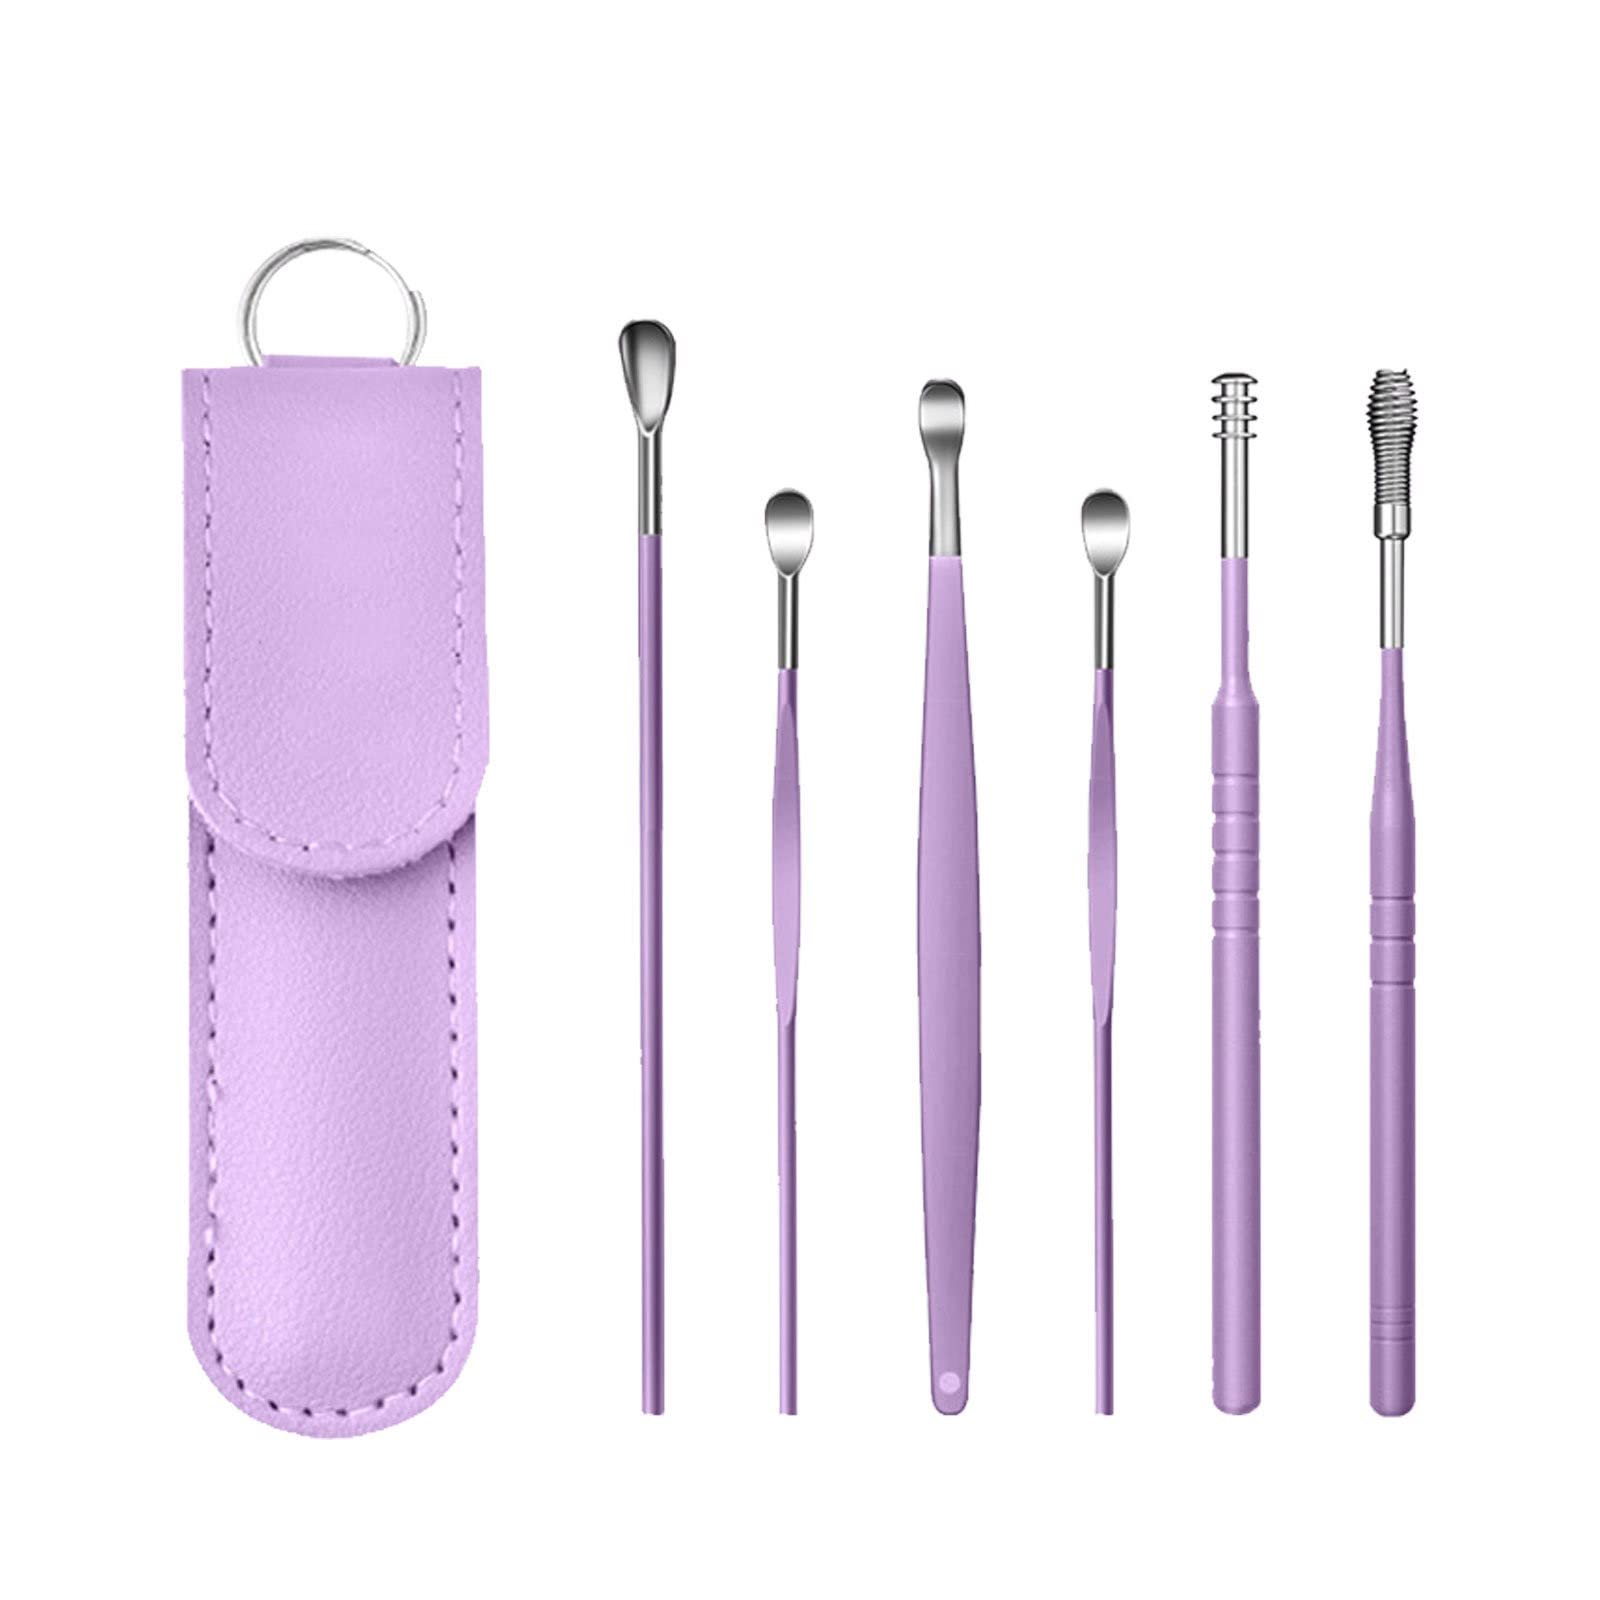 6pcs Drain Clog Remover Tool Set For Removing Hair And Other